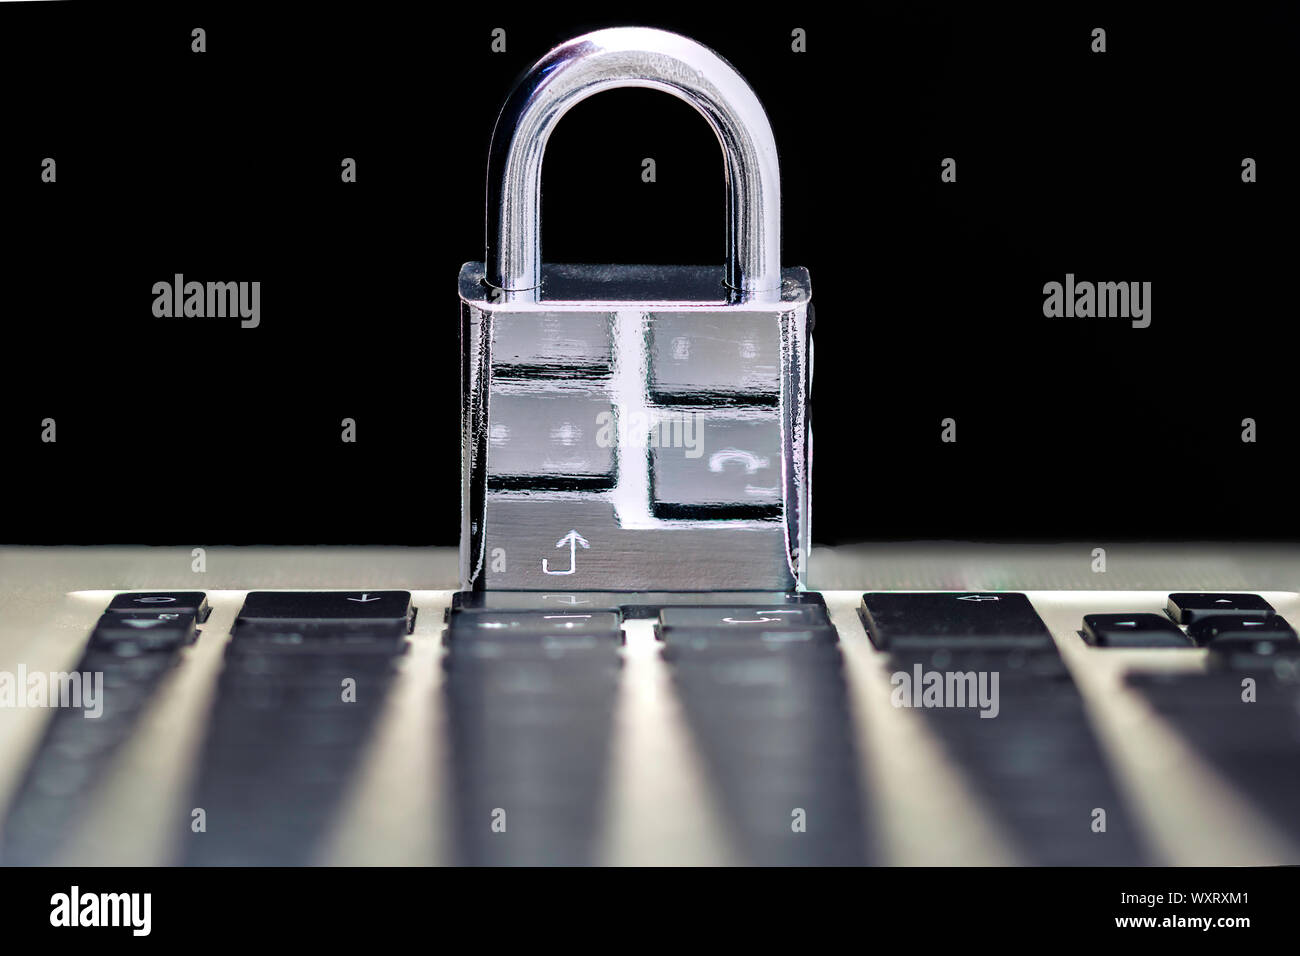 Computer Security Concept with a Closed Padlock on the Keyboard on Black Background Stock Photo